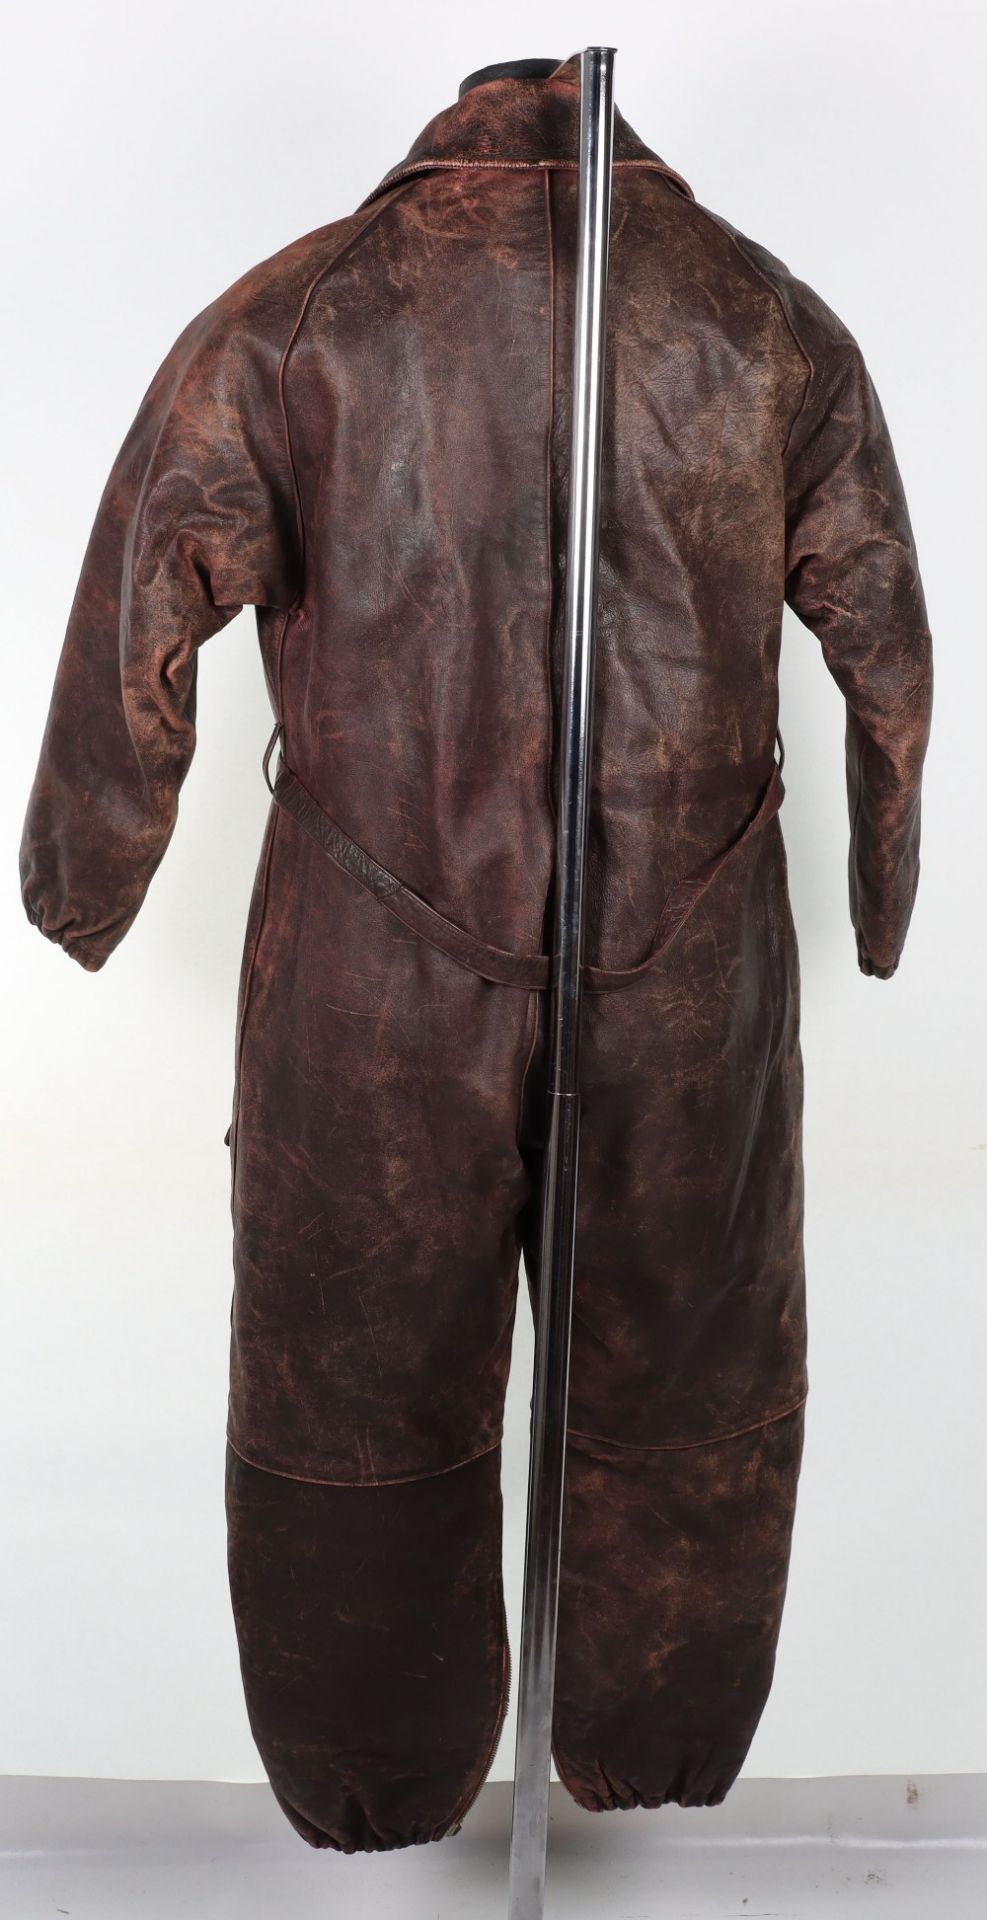 One Piece Leather Flight Suit - Image 8 of 8